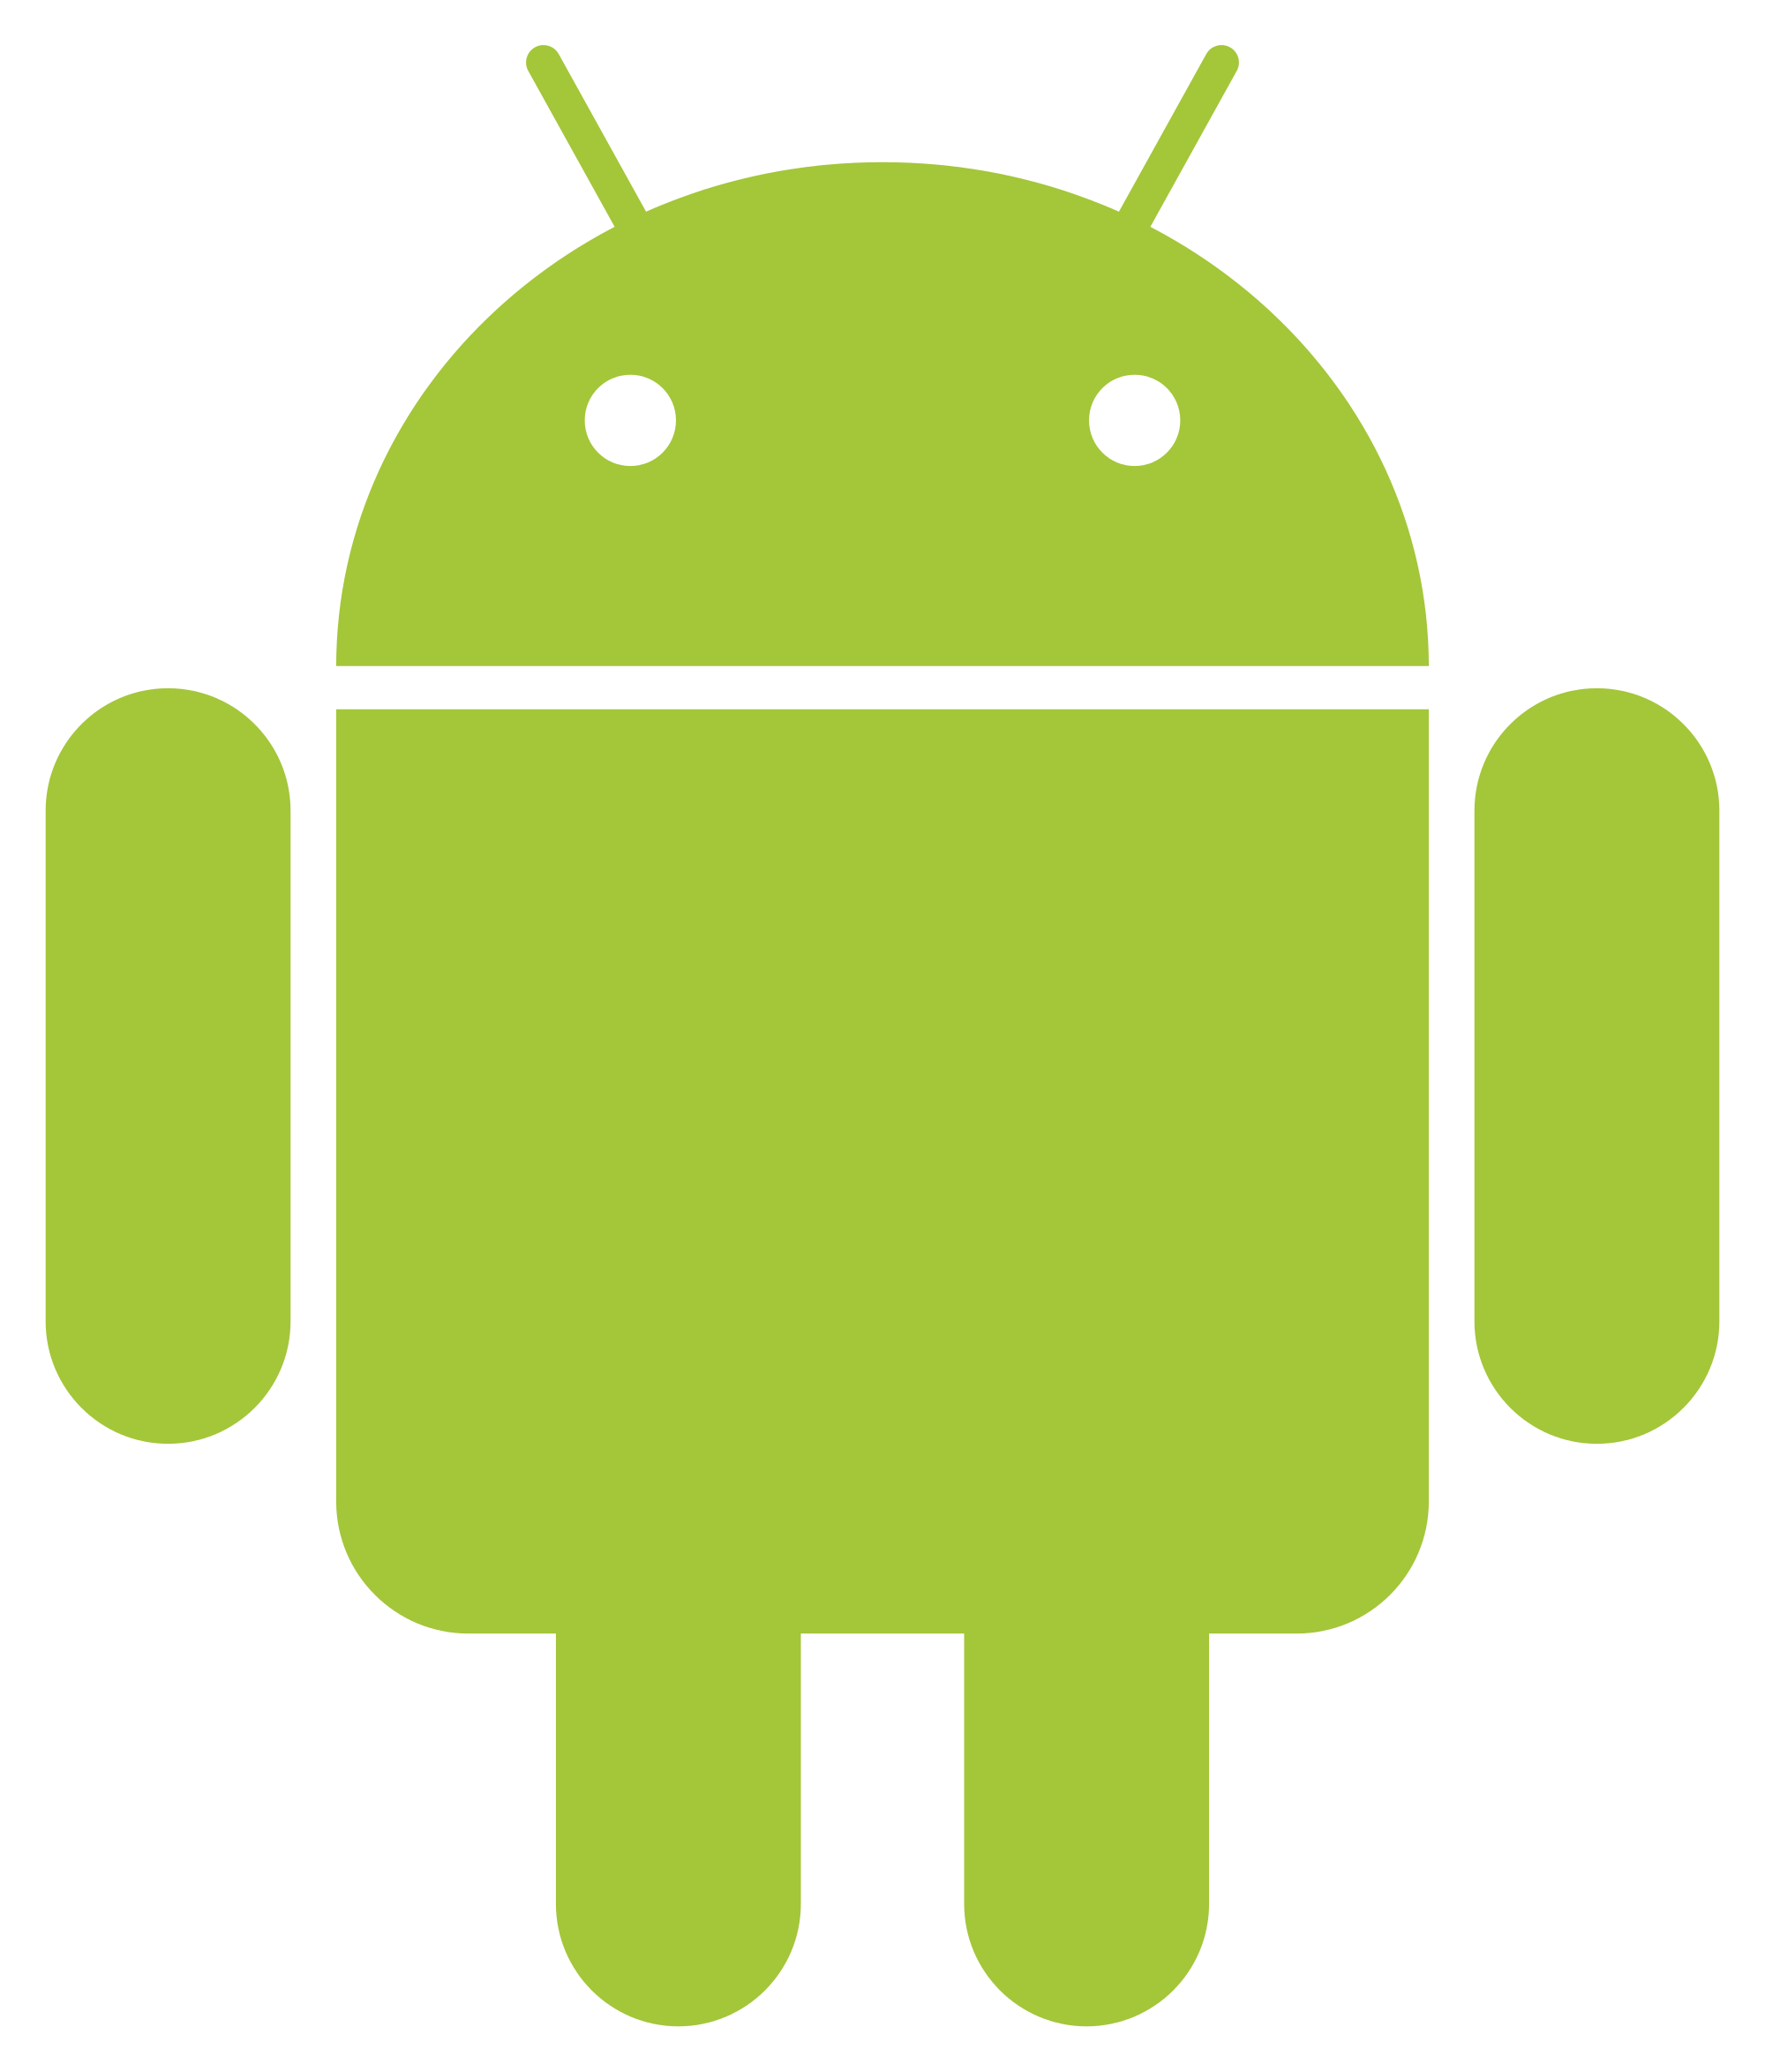 Best Android Logo Image